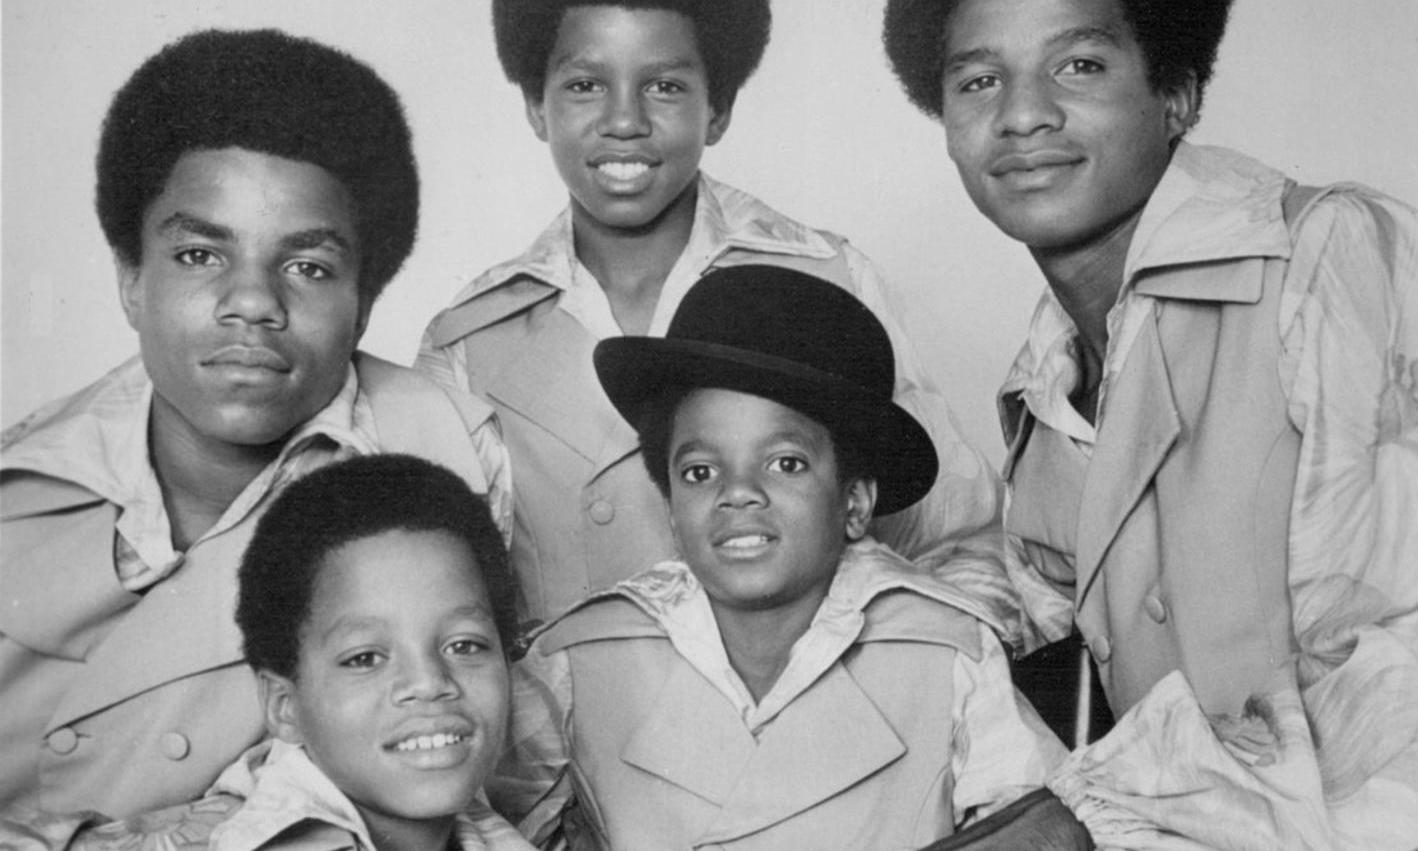 The Gary, Indiana quintet of brothers, the Jackson 5, in 1969.